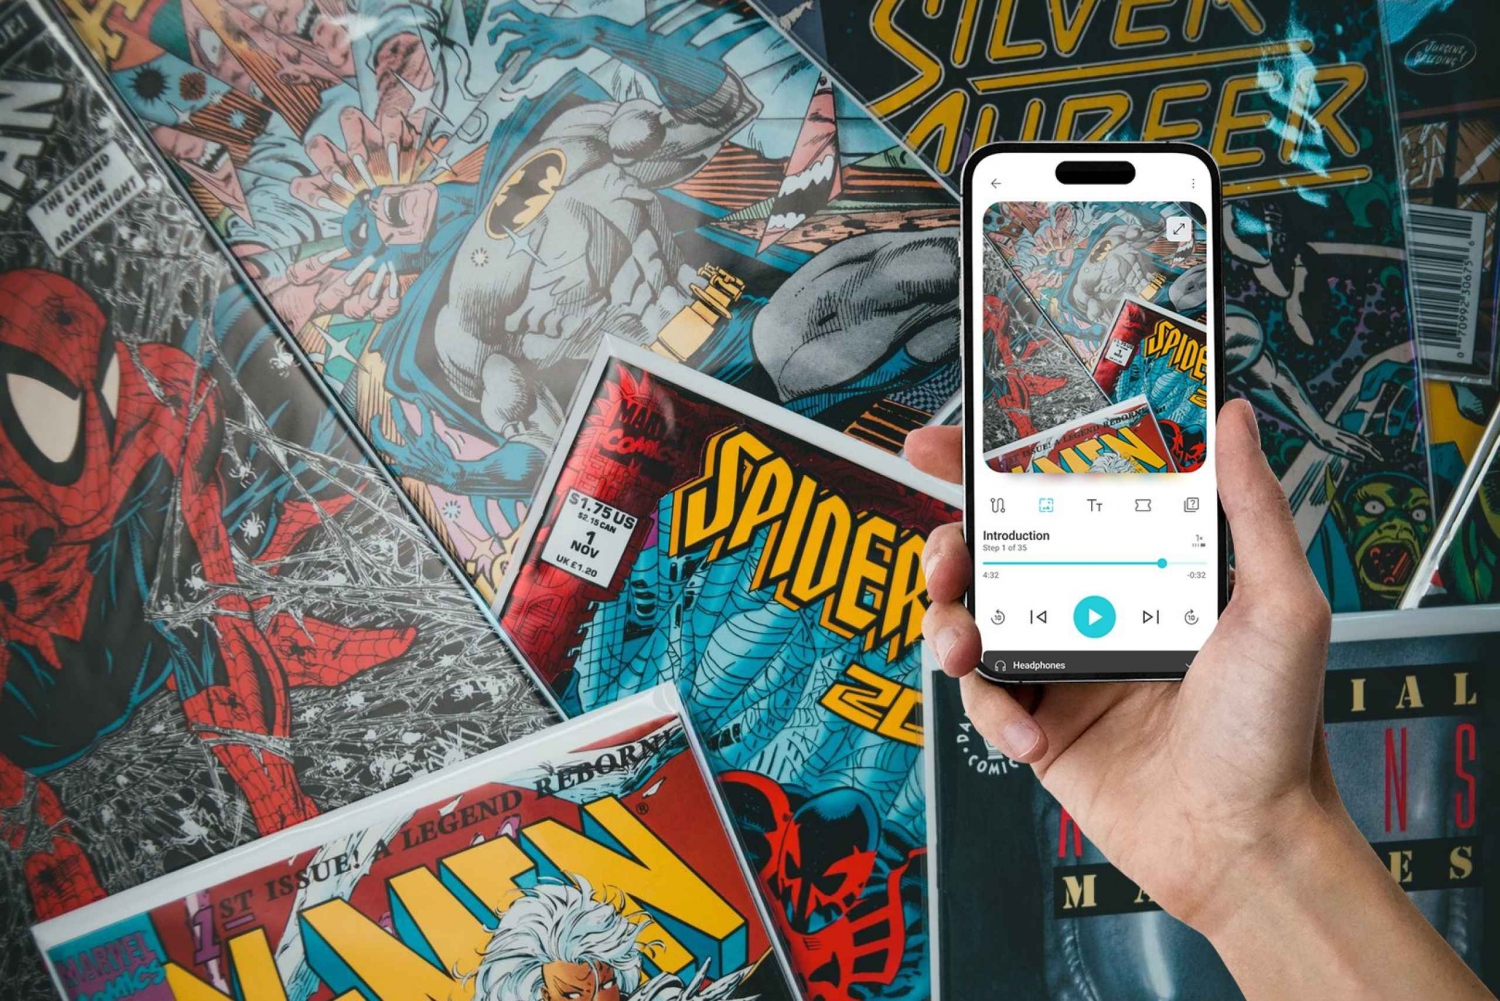 L'Universo Marvel a New York Tour audio in-app in inglese